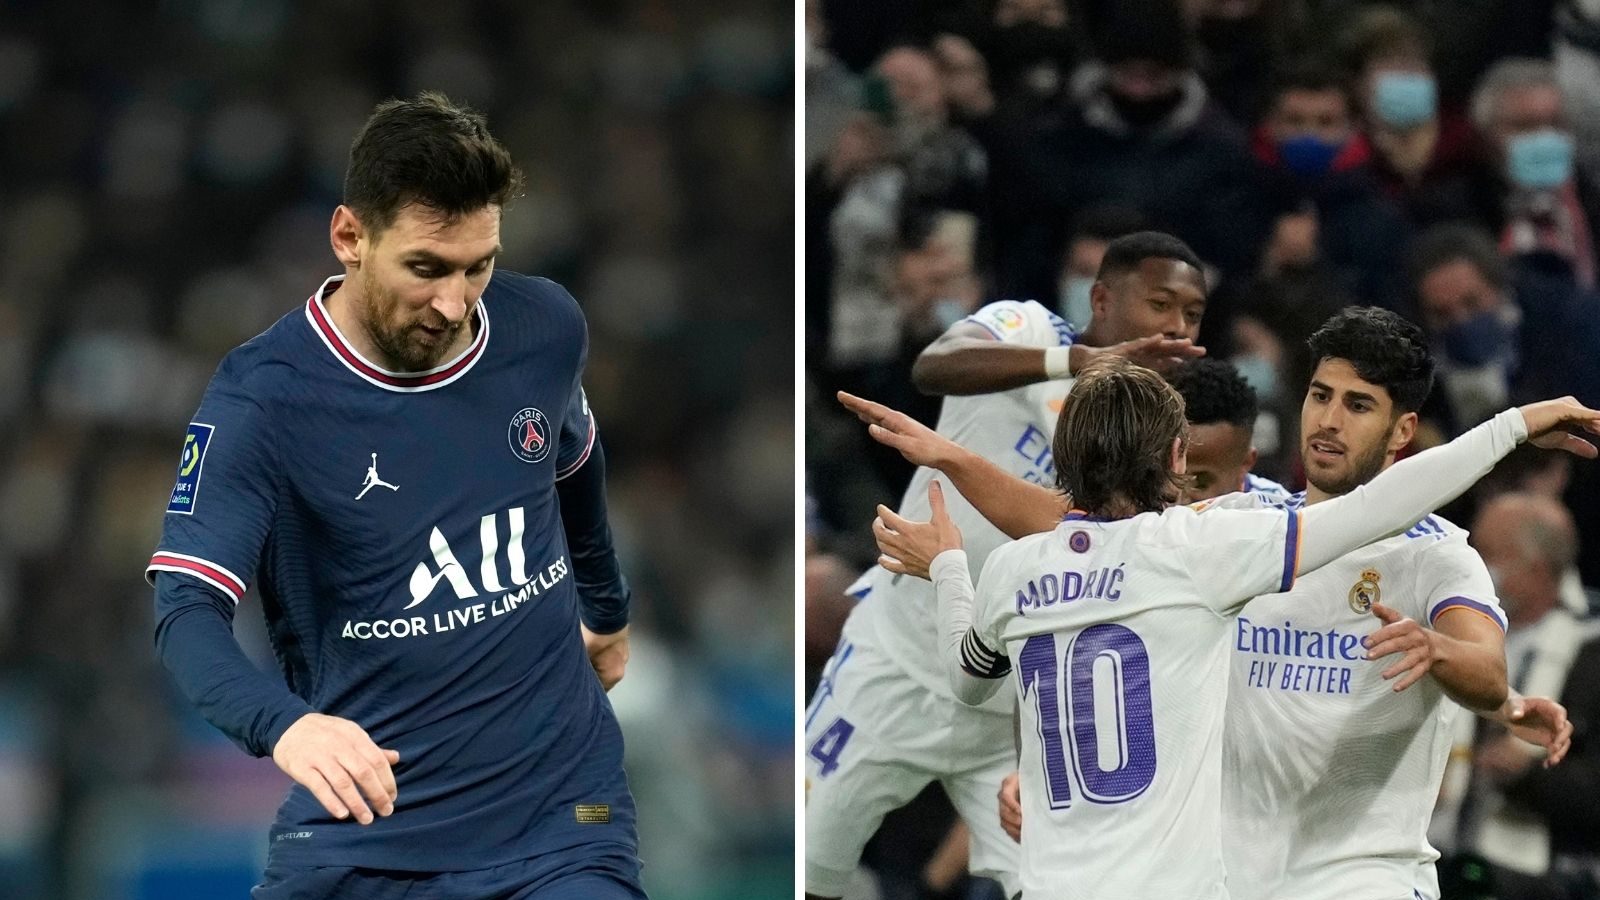 UEFA Champions League 2021-22 Real Madrid vs Paris Saint-Germain LIVE Streaming When and Where to Watch Online, TV Telecast, Team News